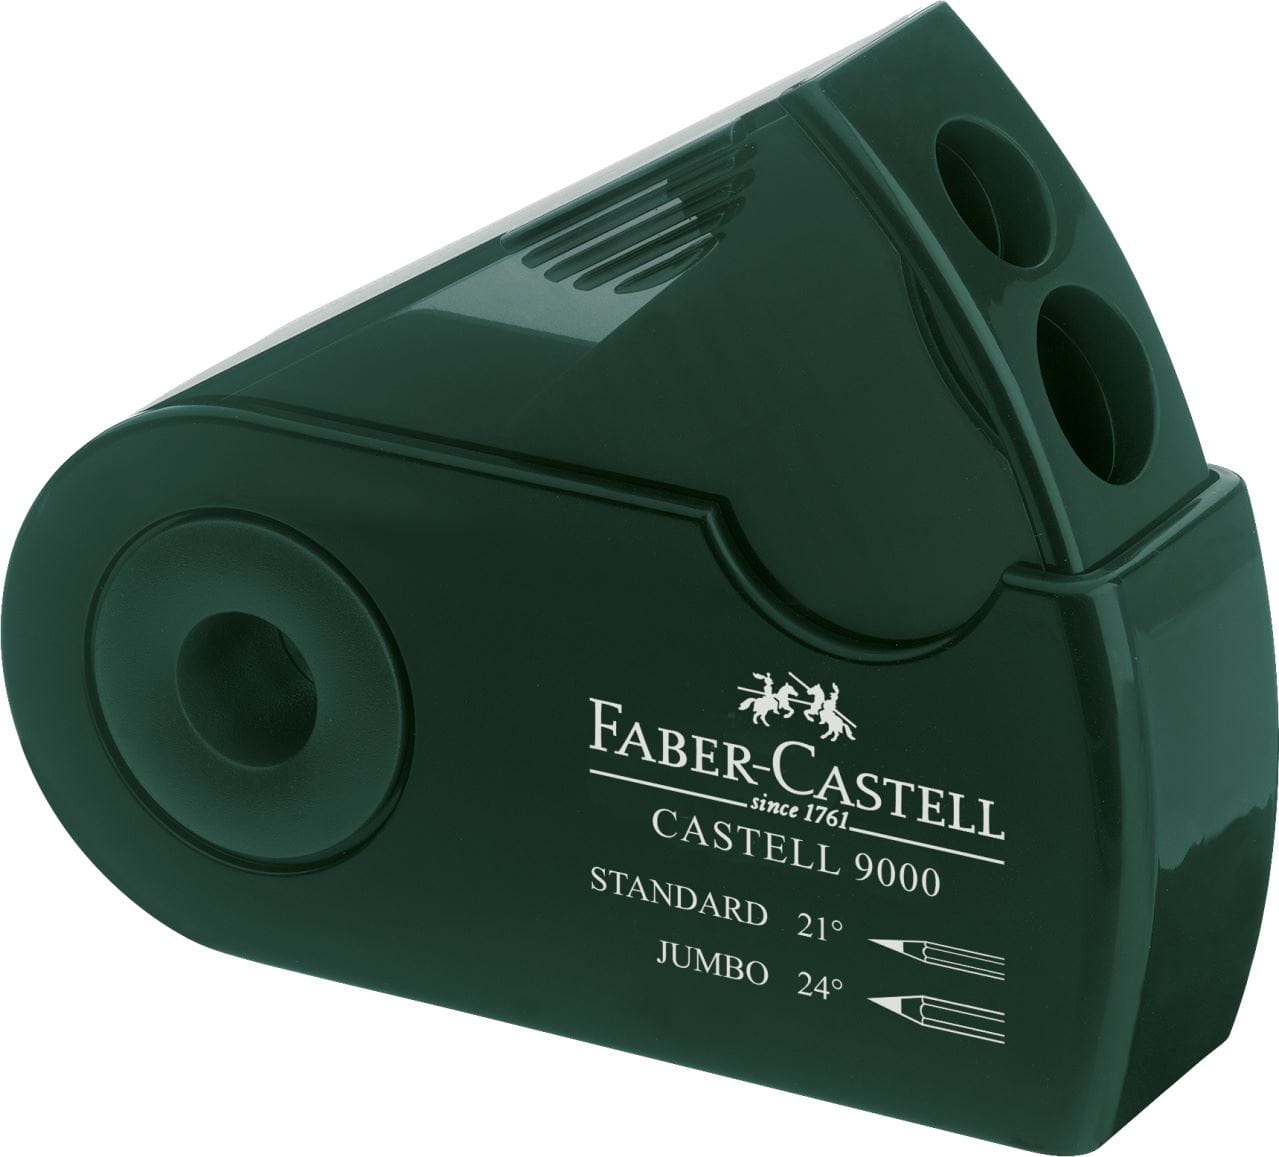 Faber-Castell - Taille-crayon, 2 usages, Castell 9000